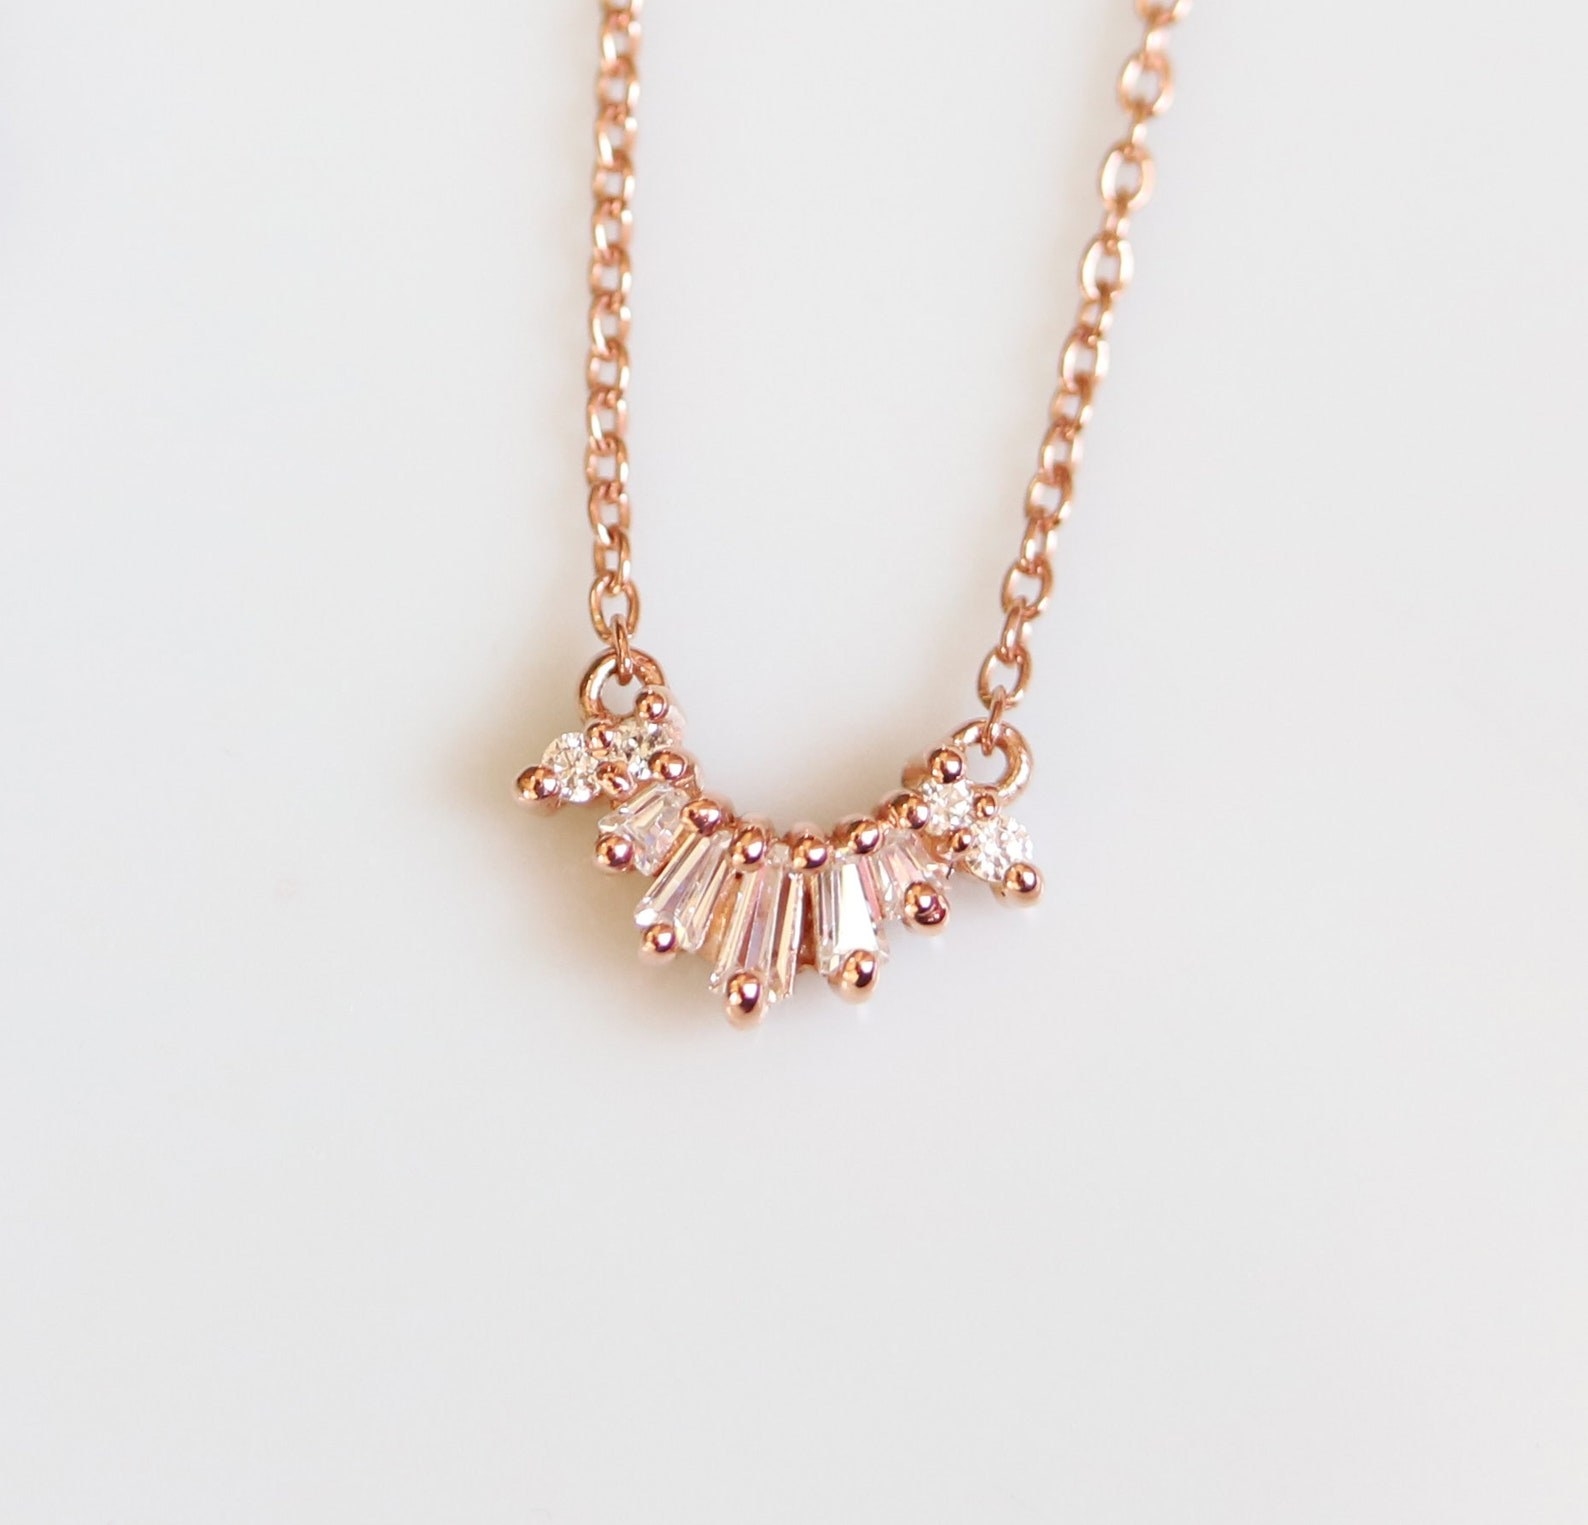 rose gold chain necklace with cluster of cubic zirconia gems